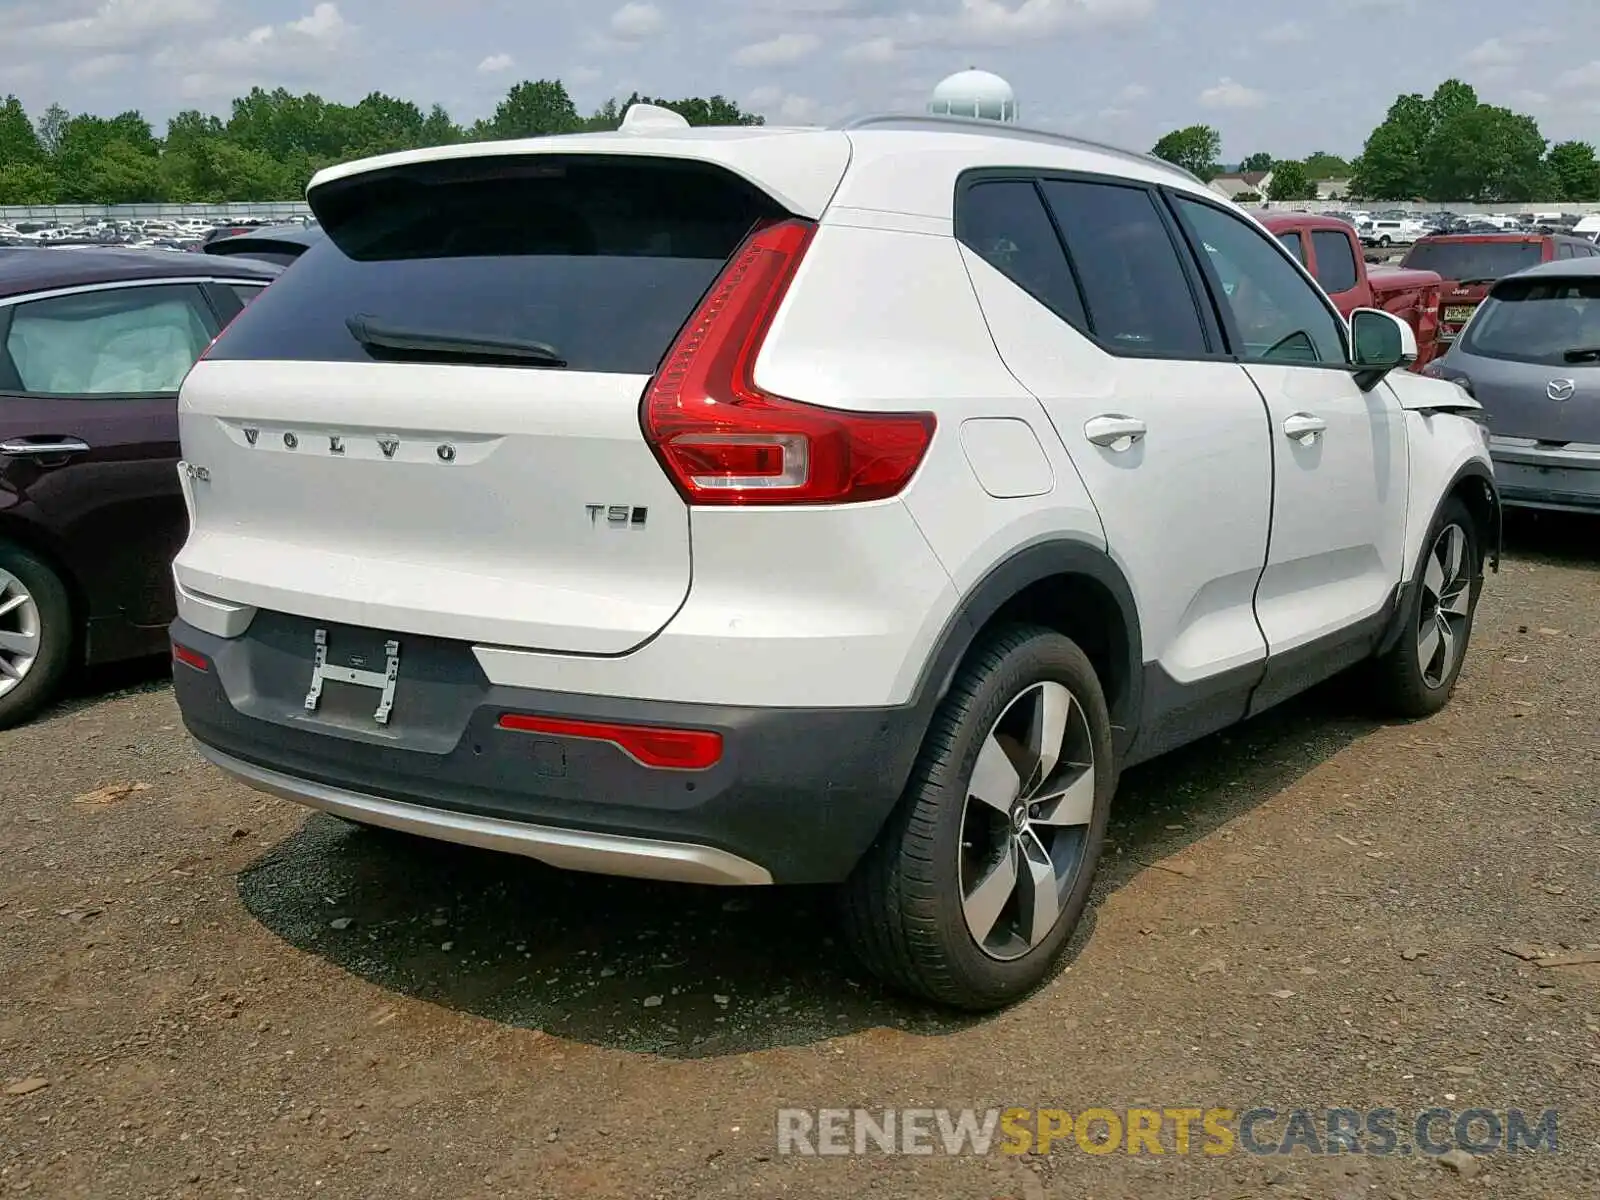 4 Photograph of a damaged car YV4162XZXK2010218 VOLVO XC40 T5 2019